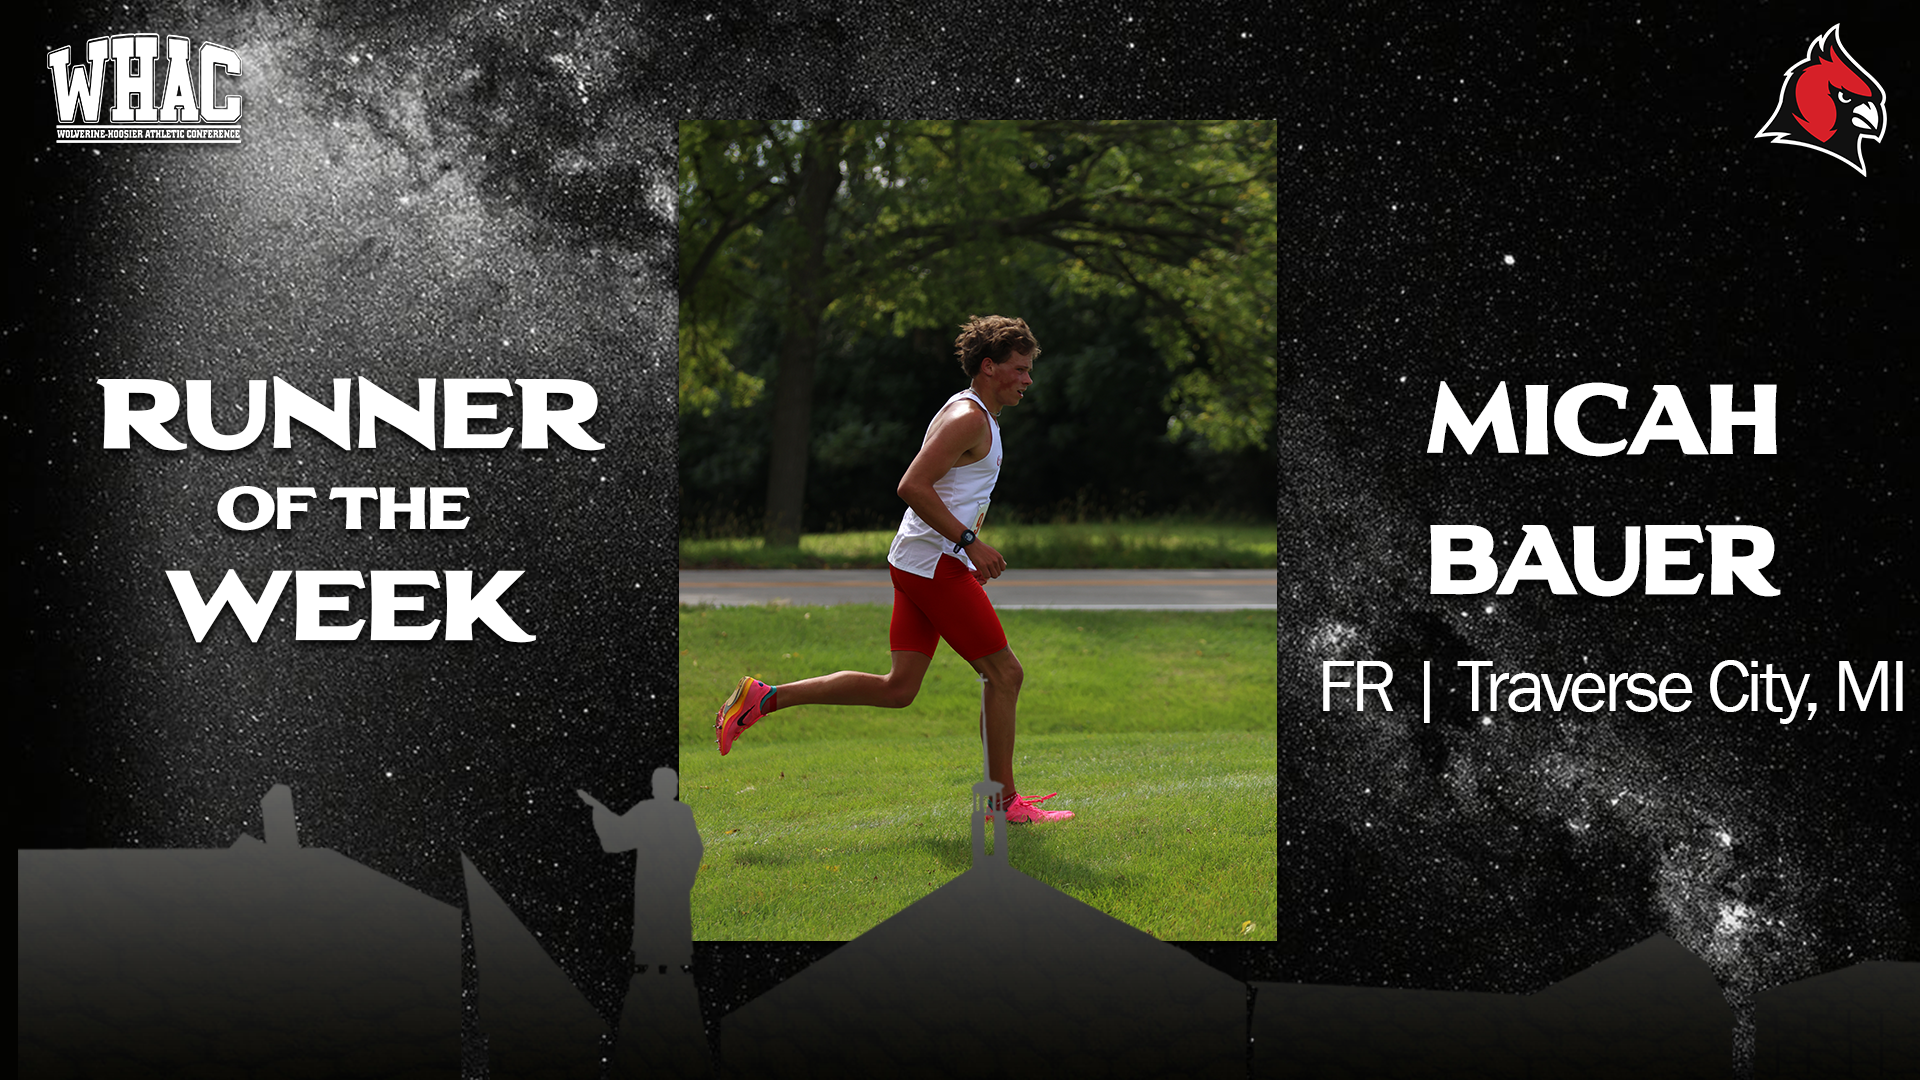 Micah Bauer earns his second WHAC Runner of the Week honor of the season